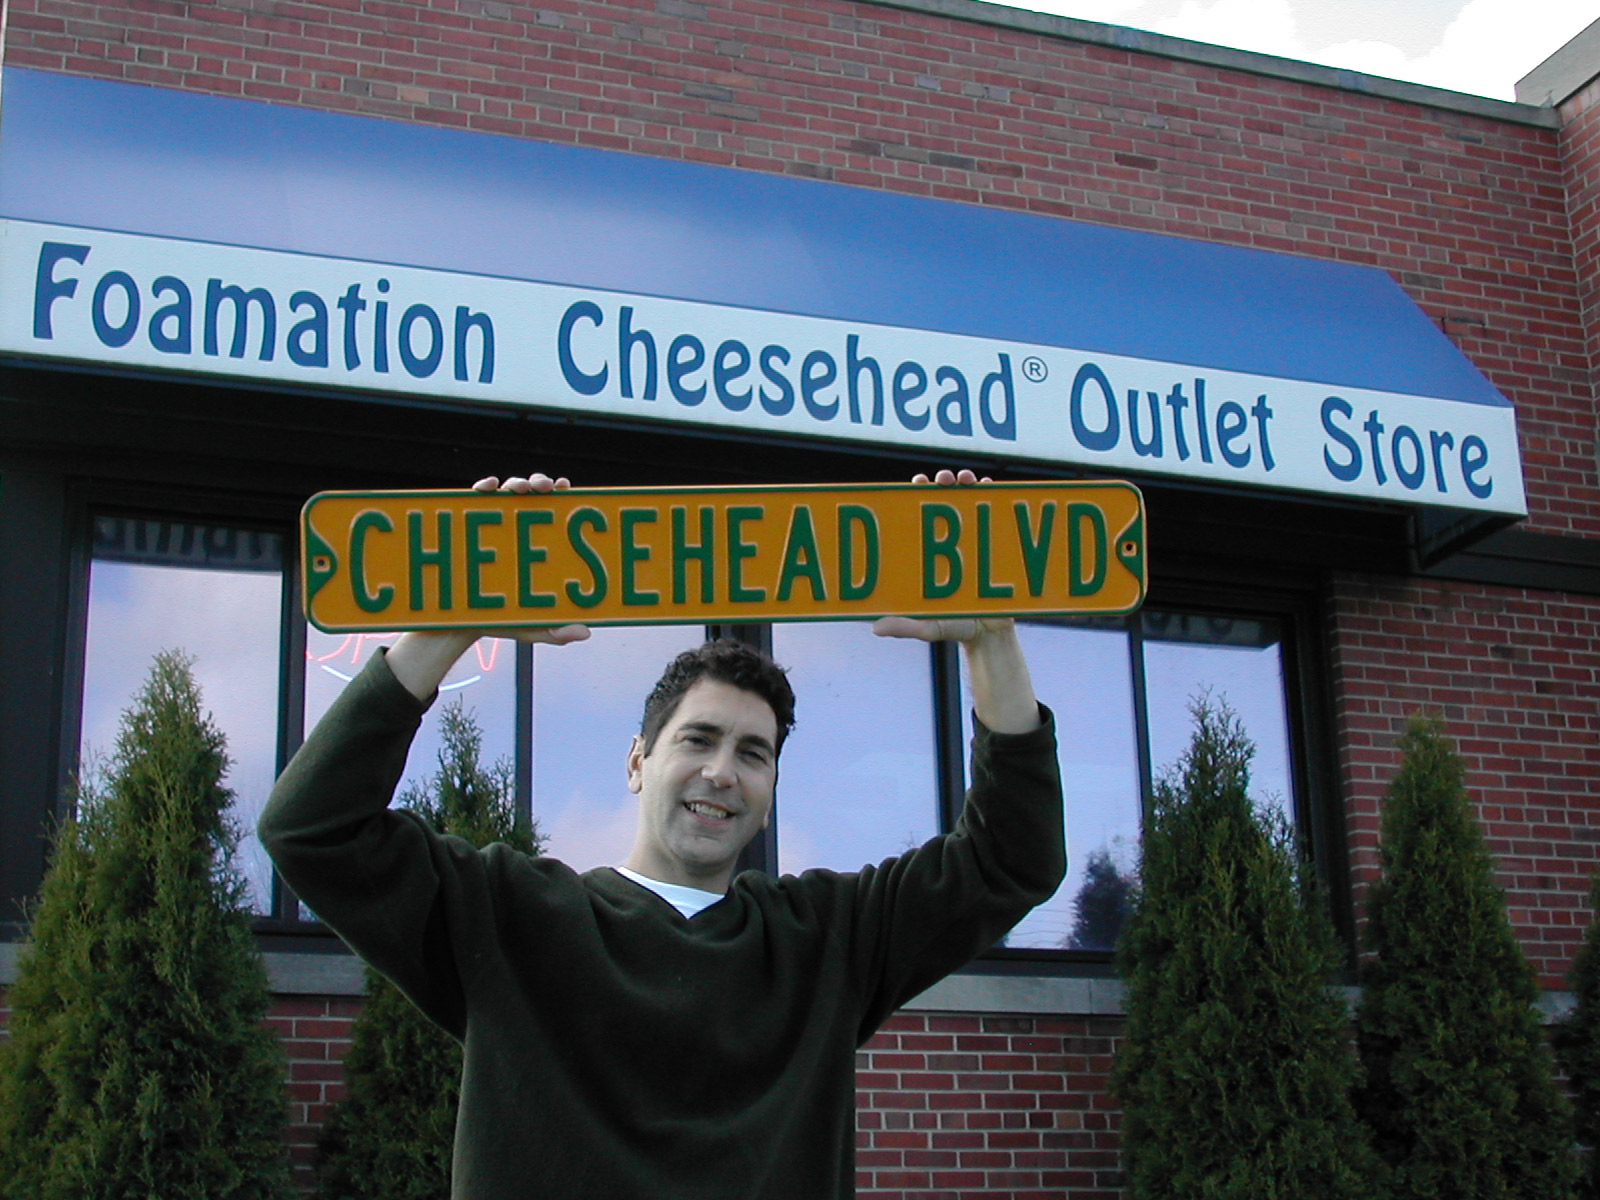 Ralph Bruno, the Cheesehead creator, stands outside the Foamation Inc. Cheesehead Outlet Store.  Foamation sells a variety of spin-offs, including the Cheesehead Ave. road sign. Photo by Michelle Wexler